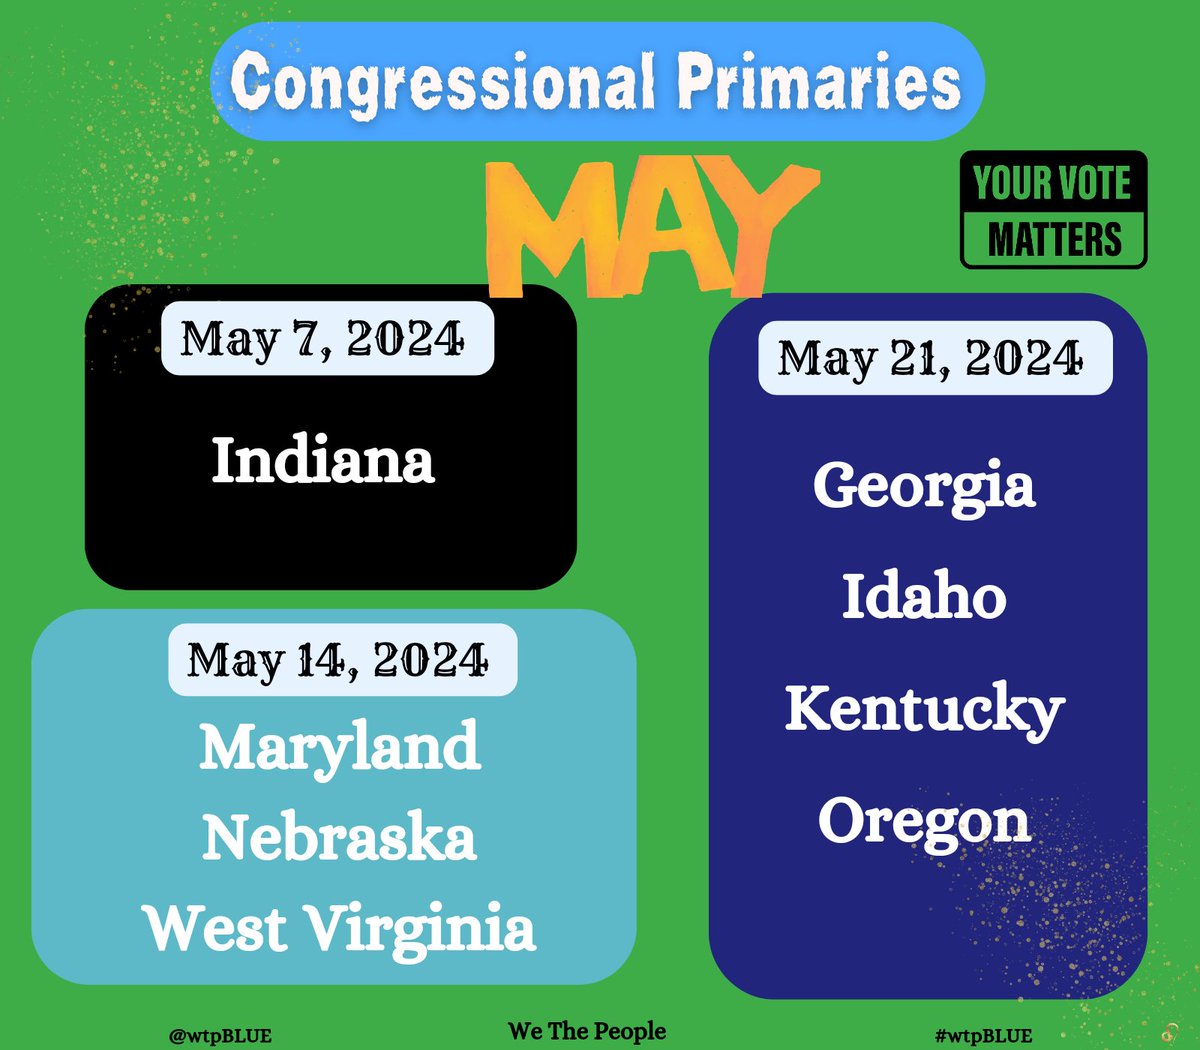 #wtpBLUE #wtpGOTV24 🚨 Friendly Reminder 🚨 Presidential & Congressional Primary ... next Tuesday, 5/14/24, in MD, NE, WV Congressional Primary 5/21/24 in GA Presidential & Congressional Primary 5/21/24 in ID, KY, OR. Vote, our civic duty!